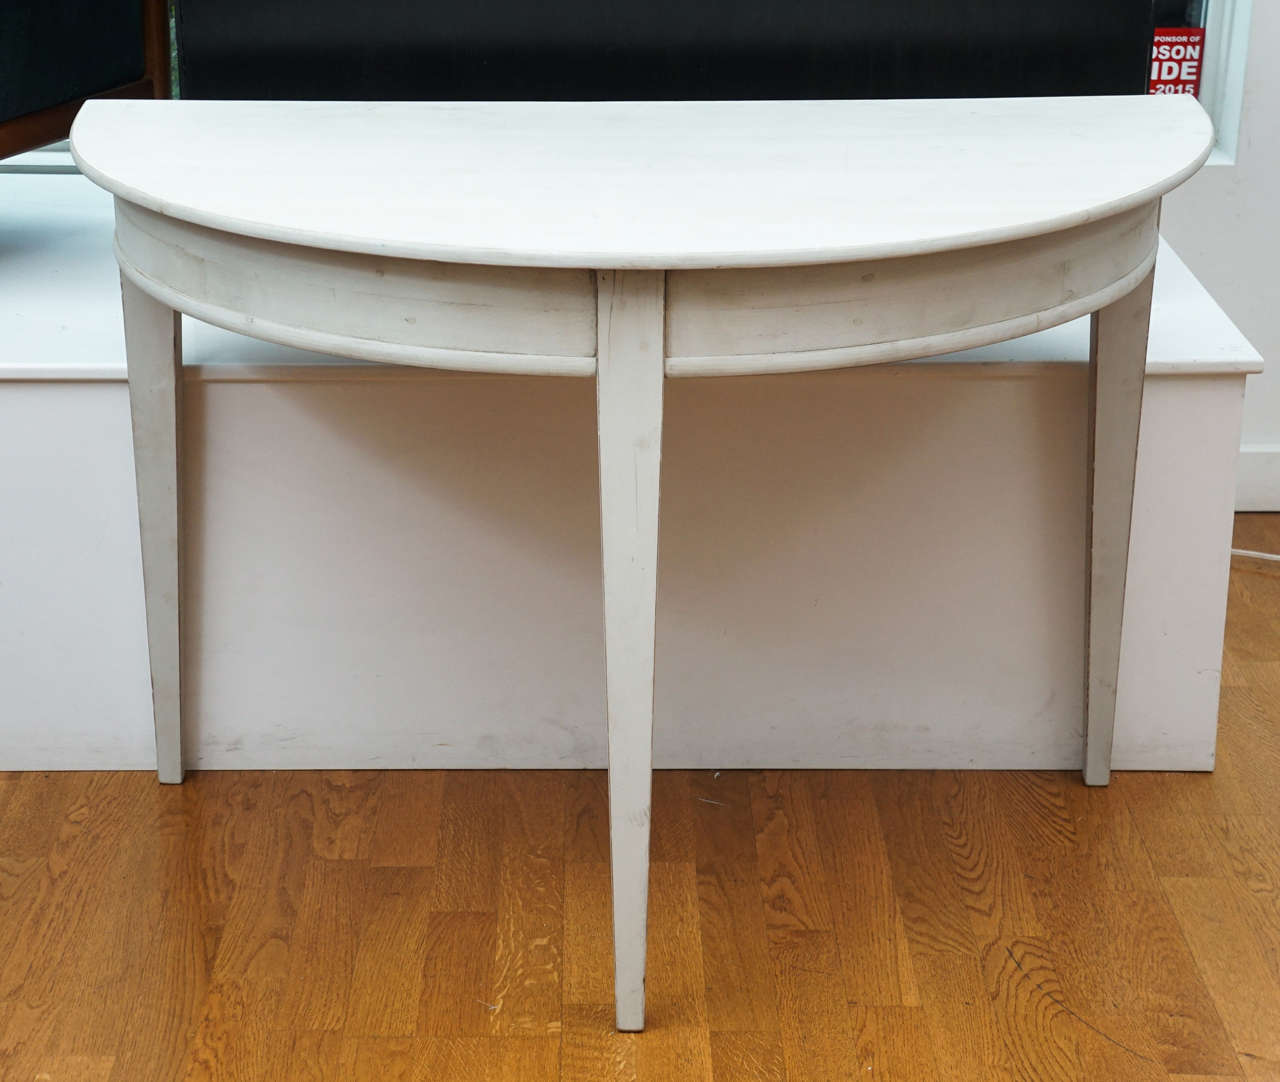 simple, elegant, demilune table in an oyster white, distressed, gustavian finish.
stands on three square tapered legs.